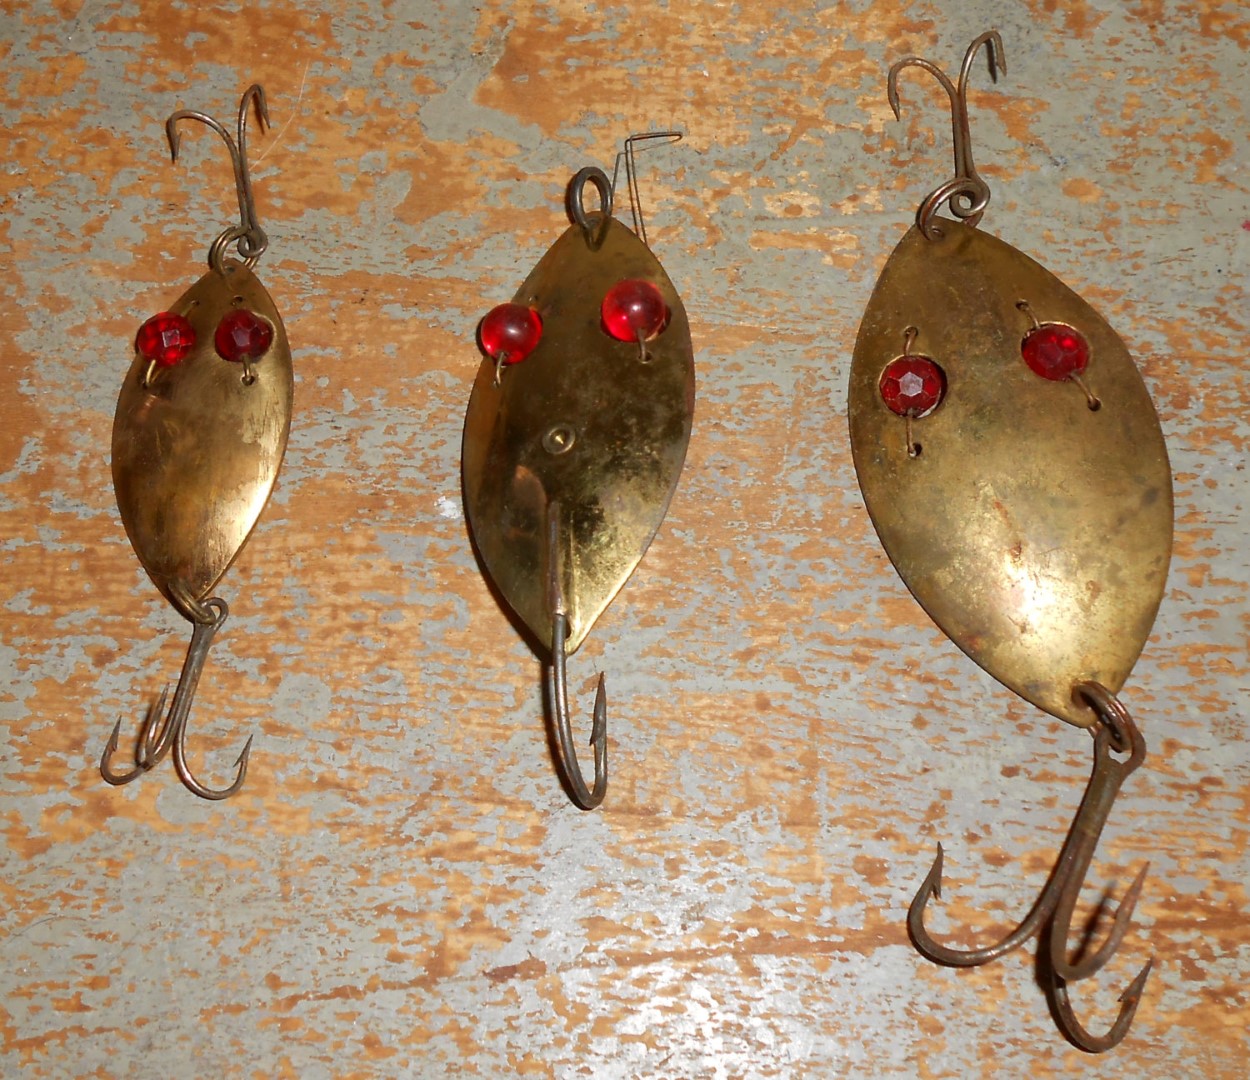 Trout Spoons